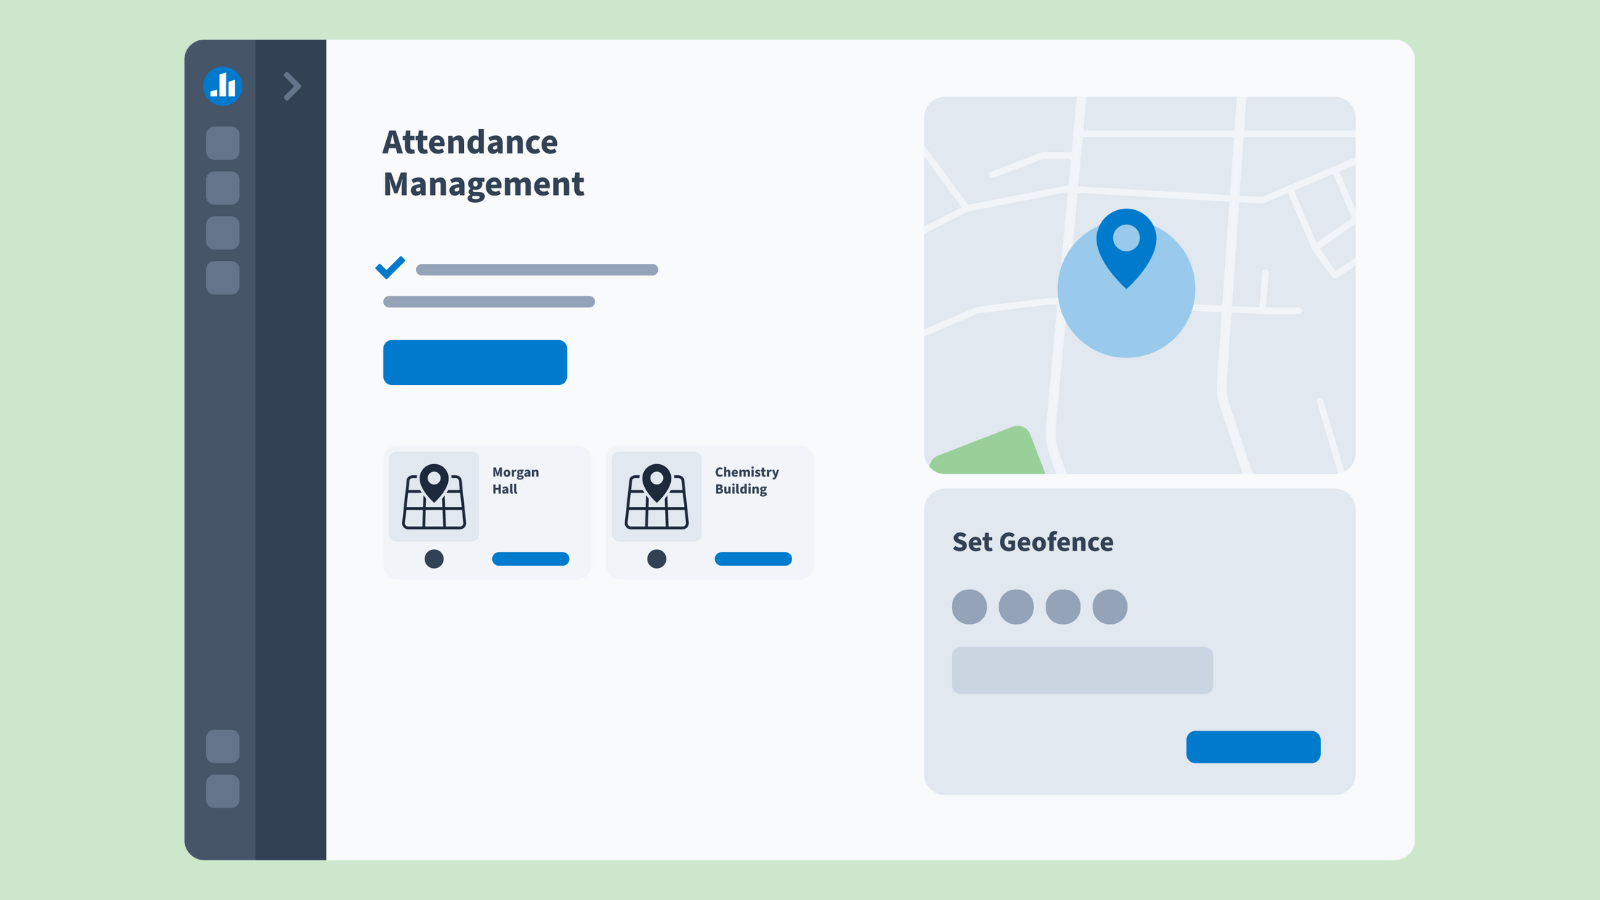 Poll Everywhere's new Attendance Management feature